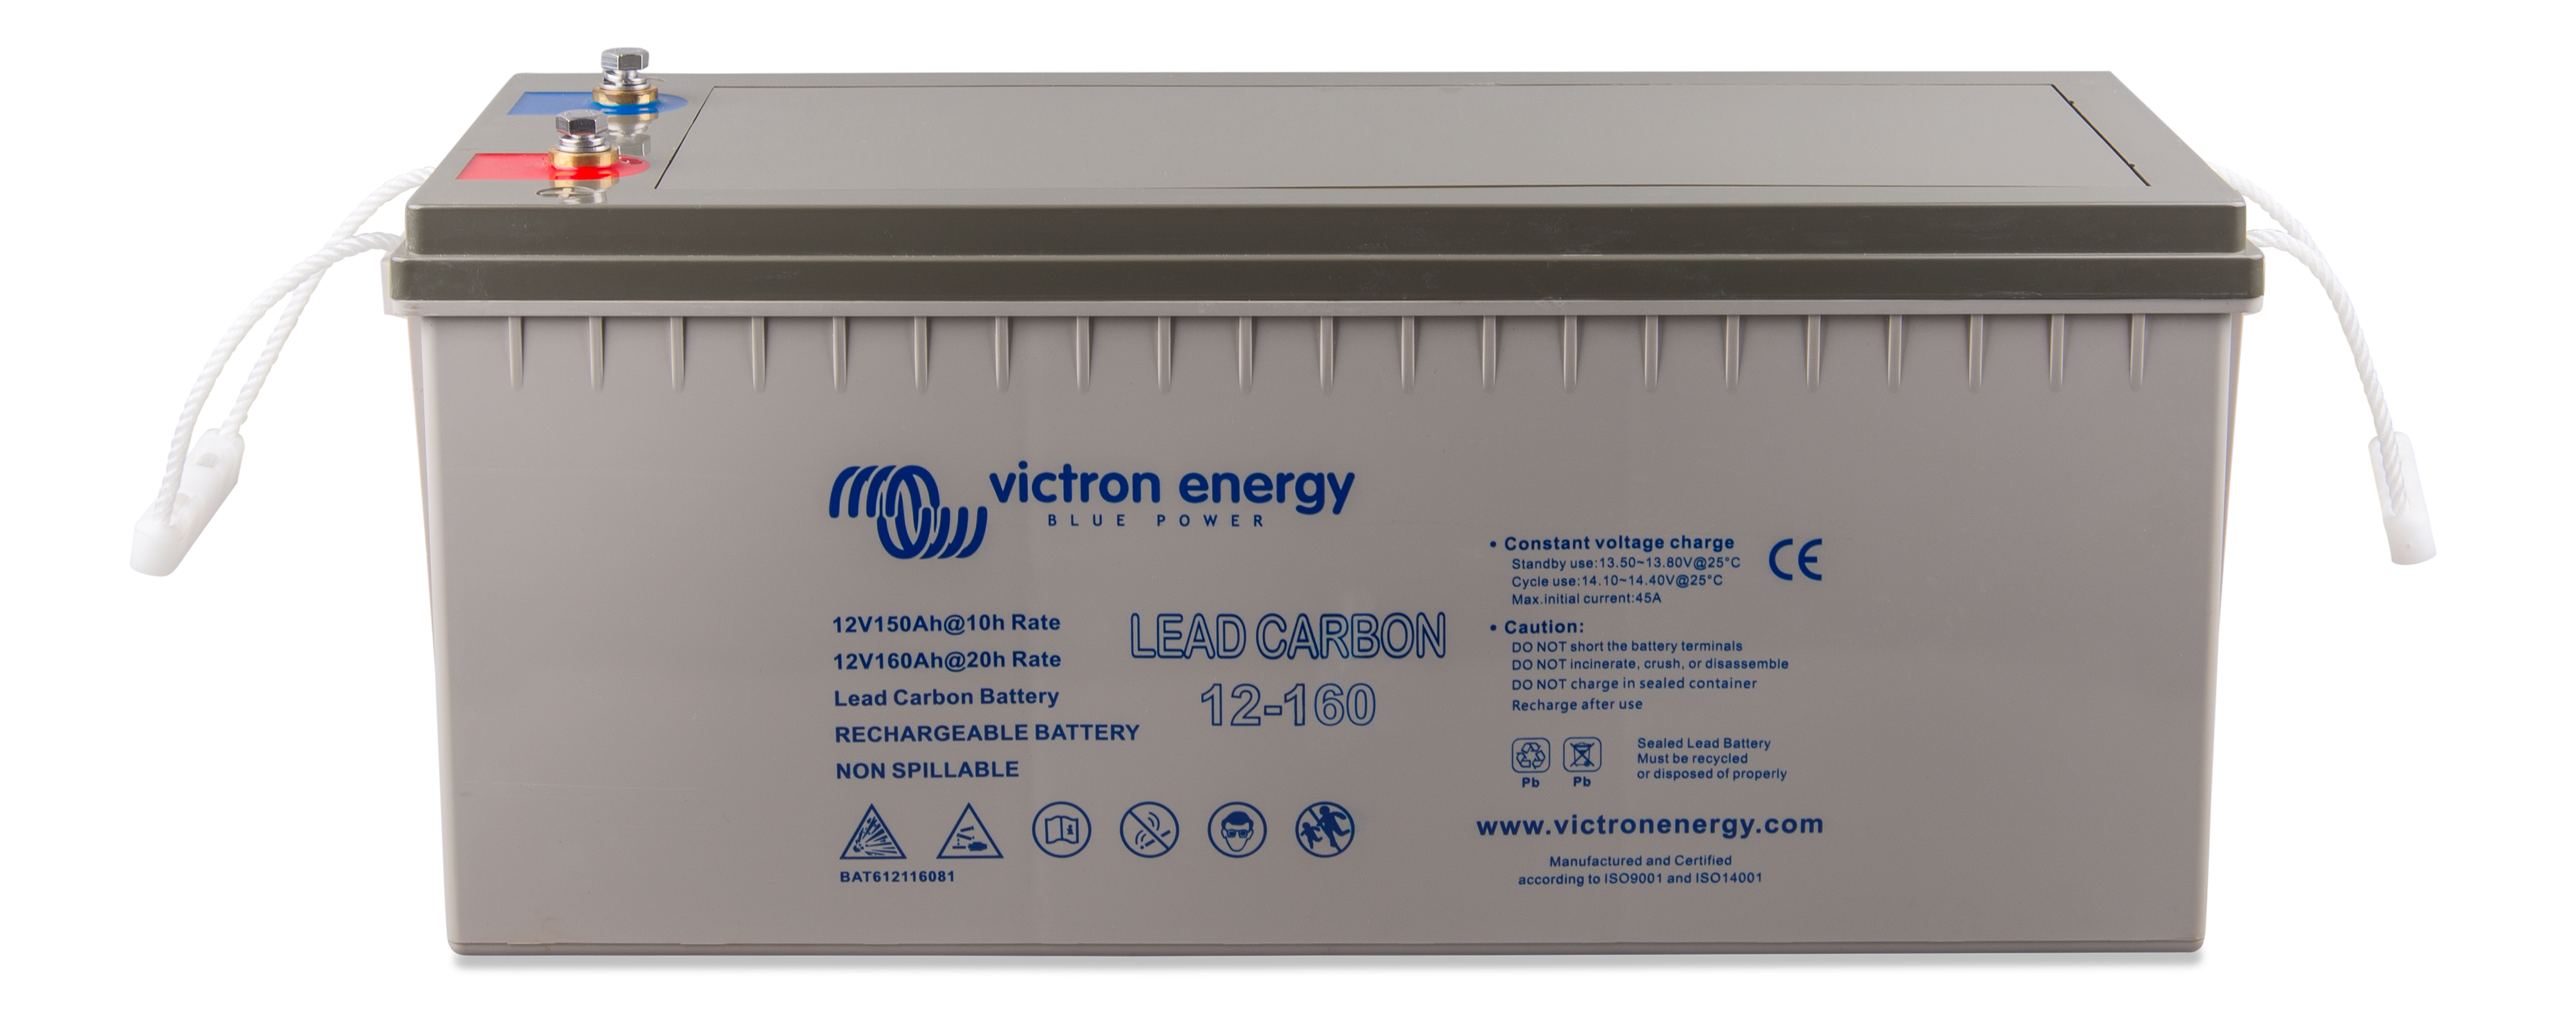 Lead Carbon Battery. Prices from –